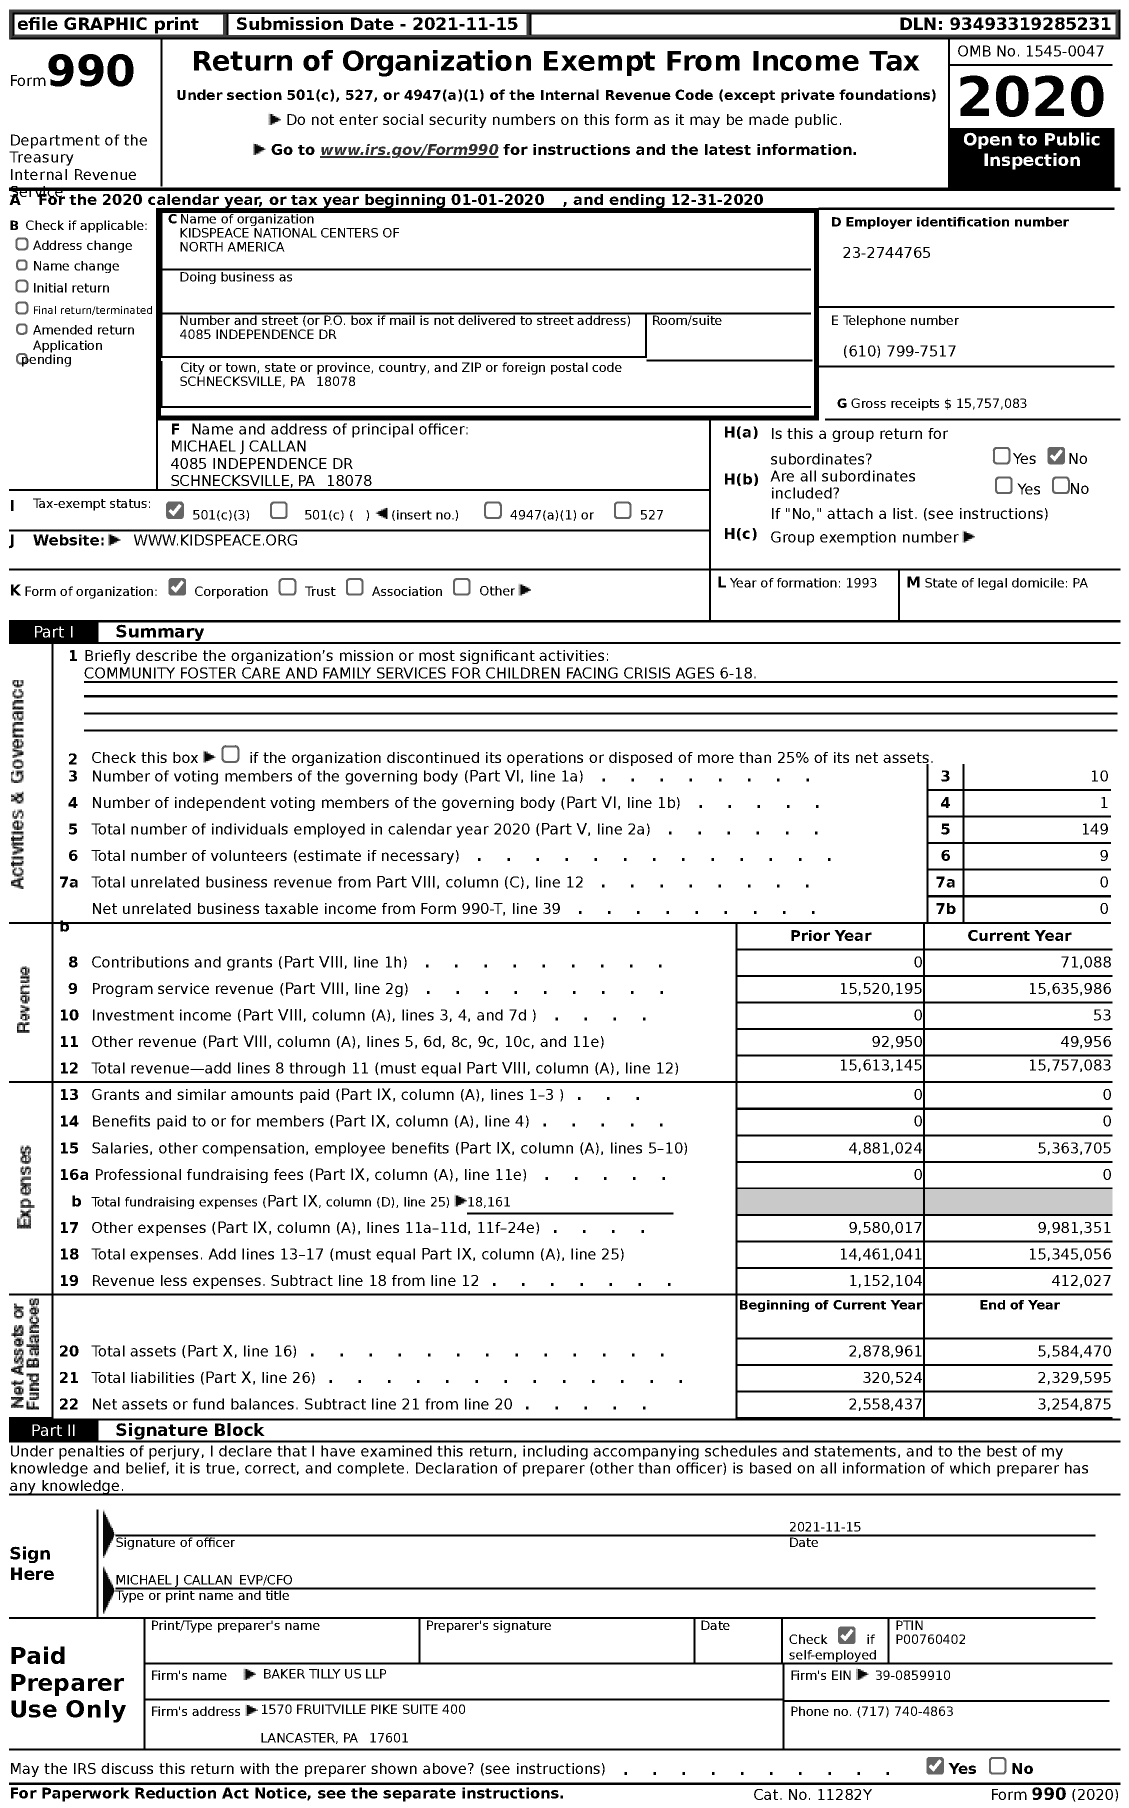 Image of first page of 2020 Form 990 for KidsPeace National Centers of North America